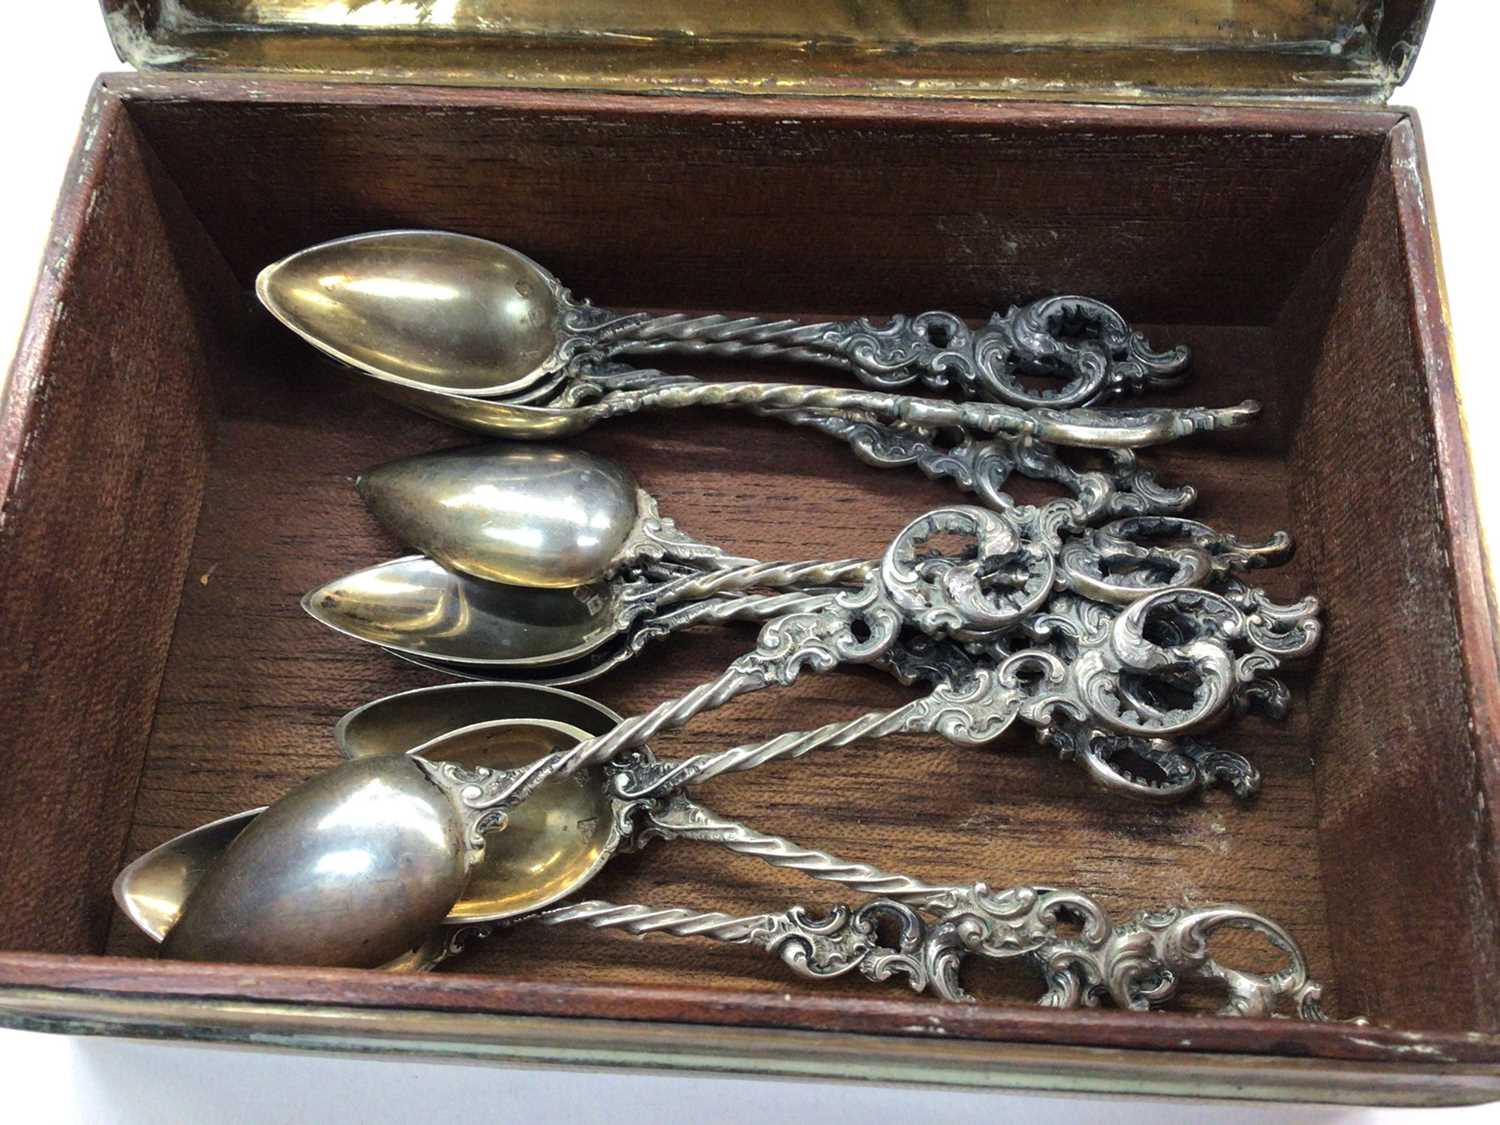 Group of silver and white metal spoons and pair of silver sugar tongs, in a brass inlaid box - Image 3 of 4